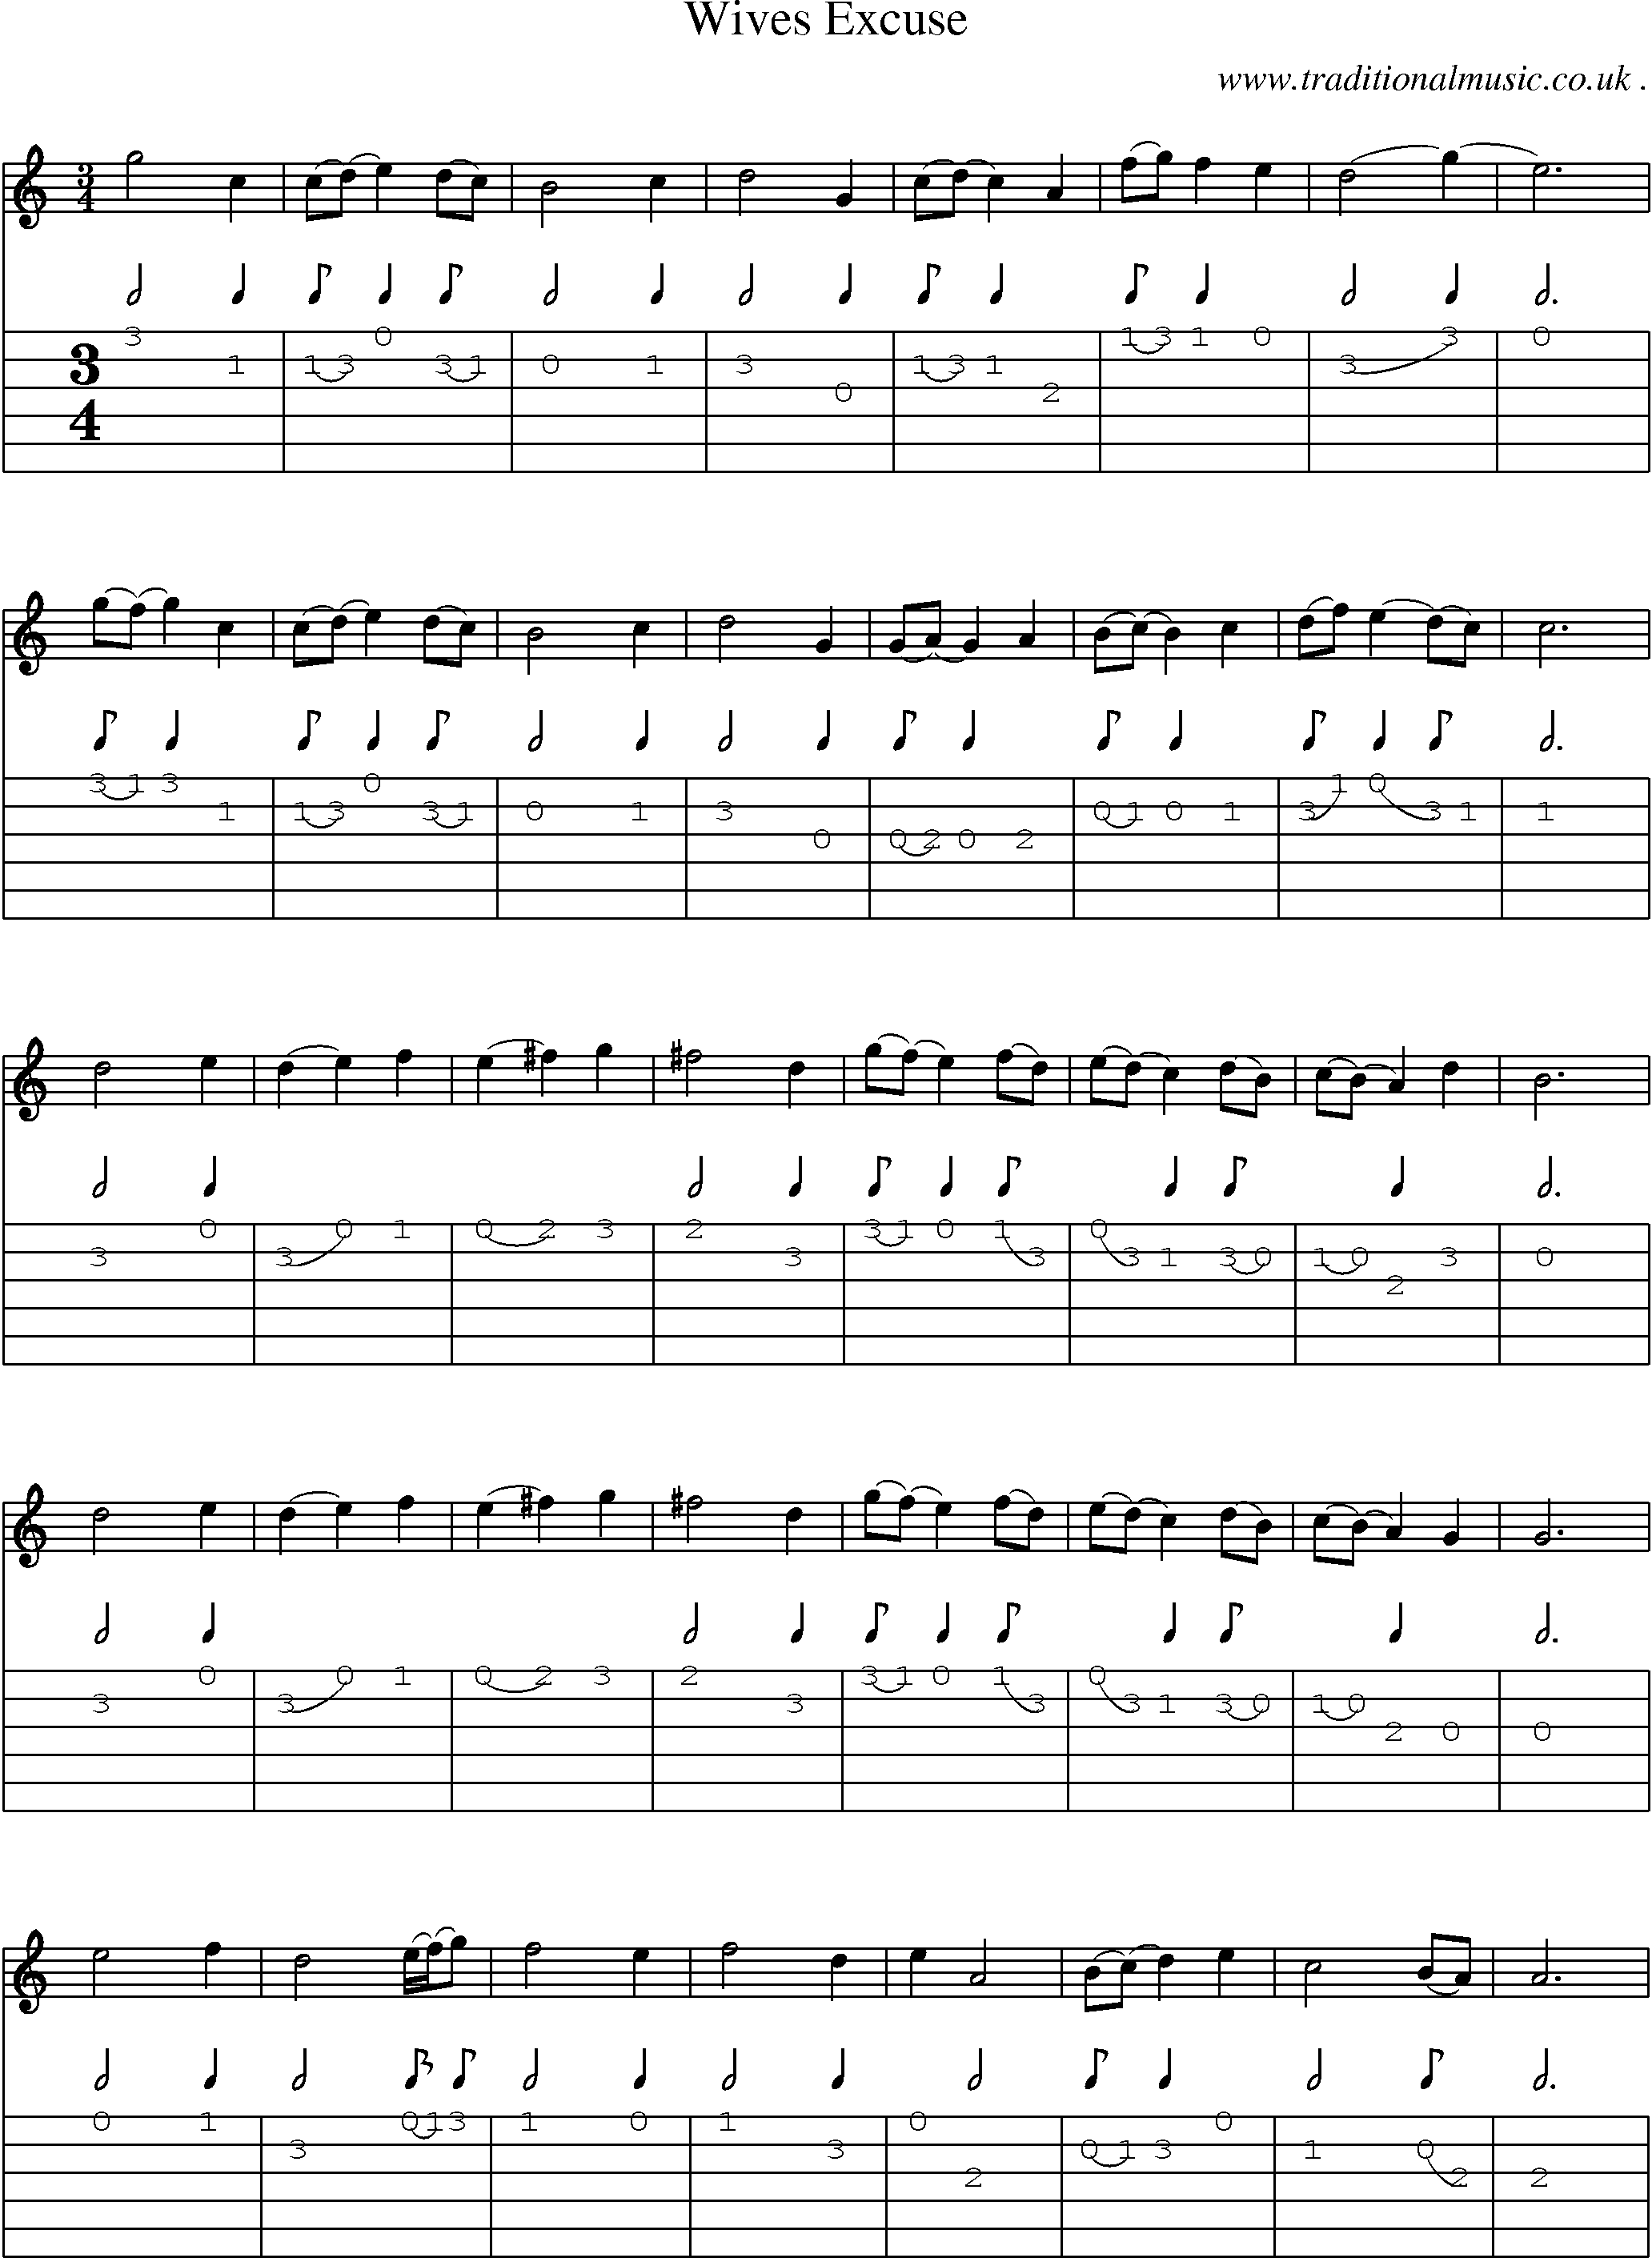 Sheet-Music and Guitar Tabs for Wives Excuse